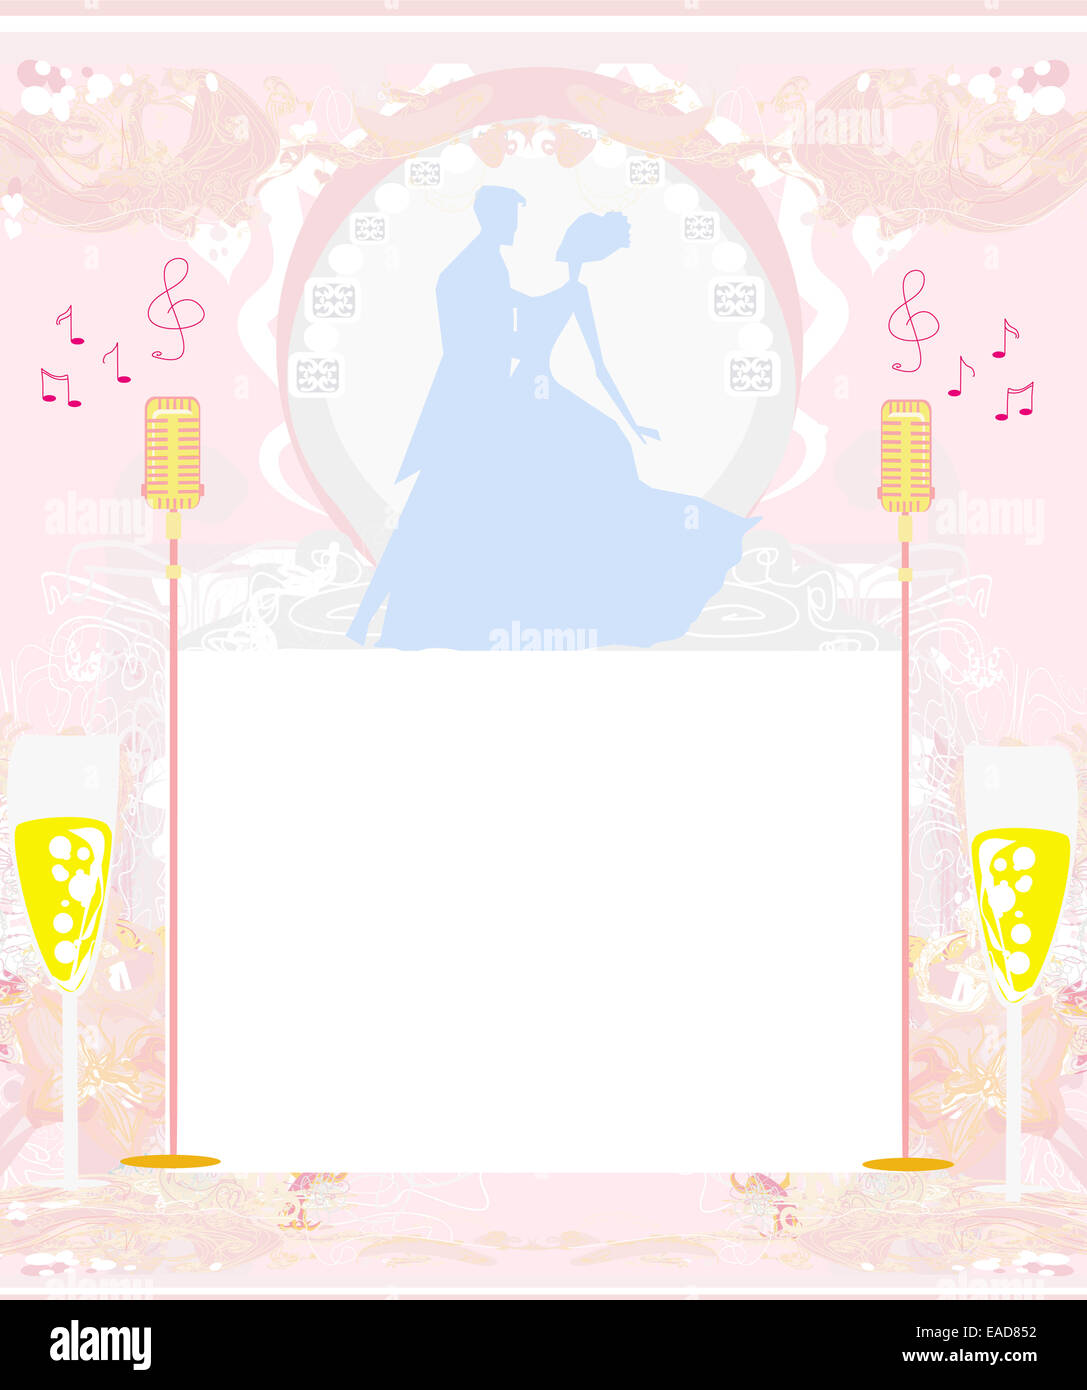 10-best-picture-blank-invitation-card-template-in-2021-free-invitation-cards-blank-wedding